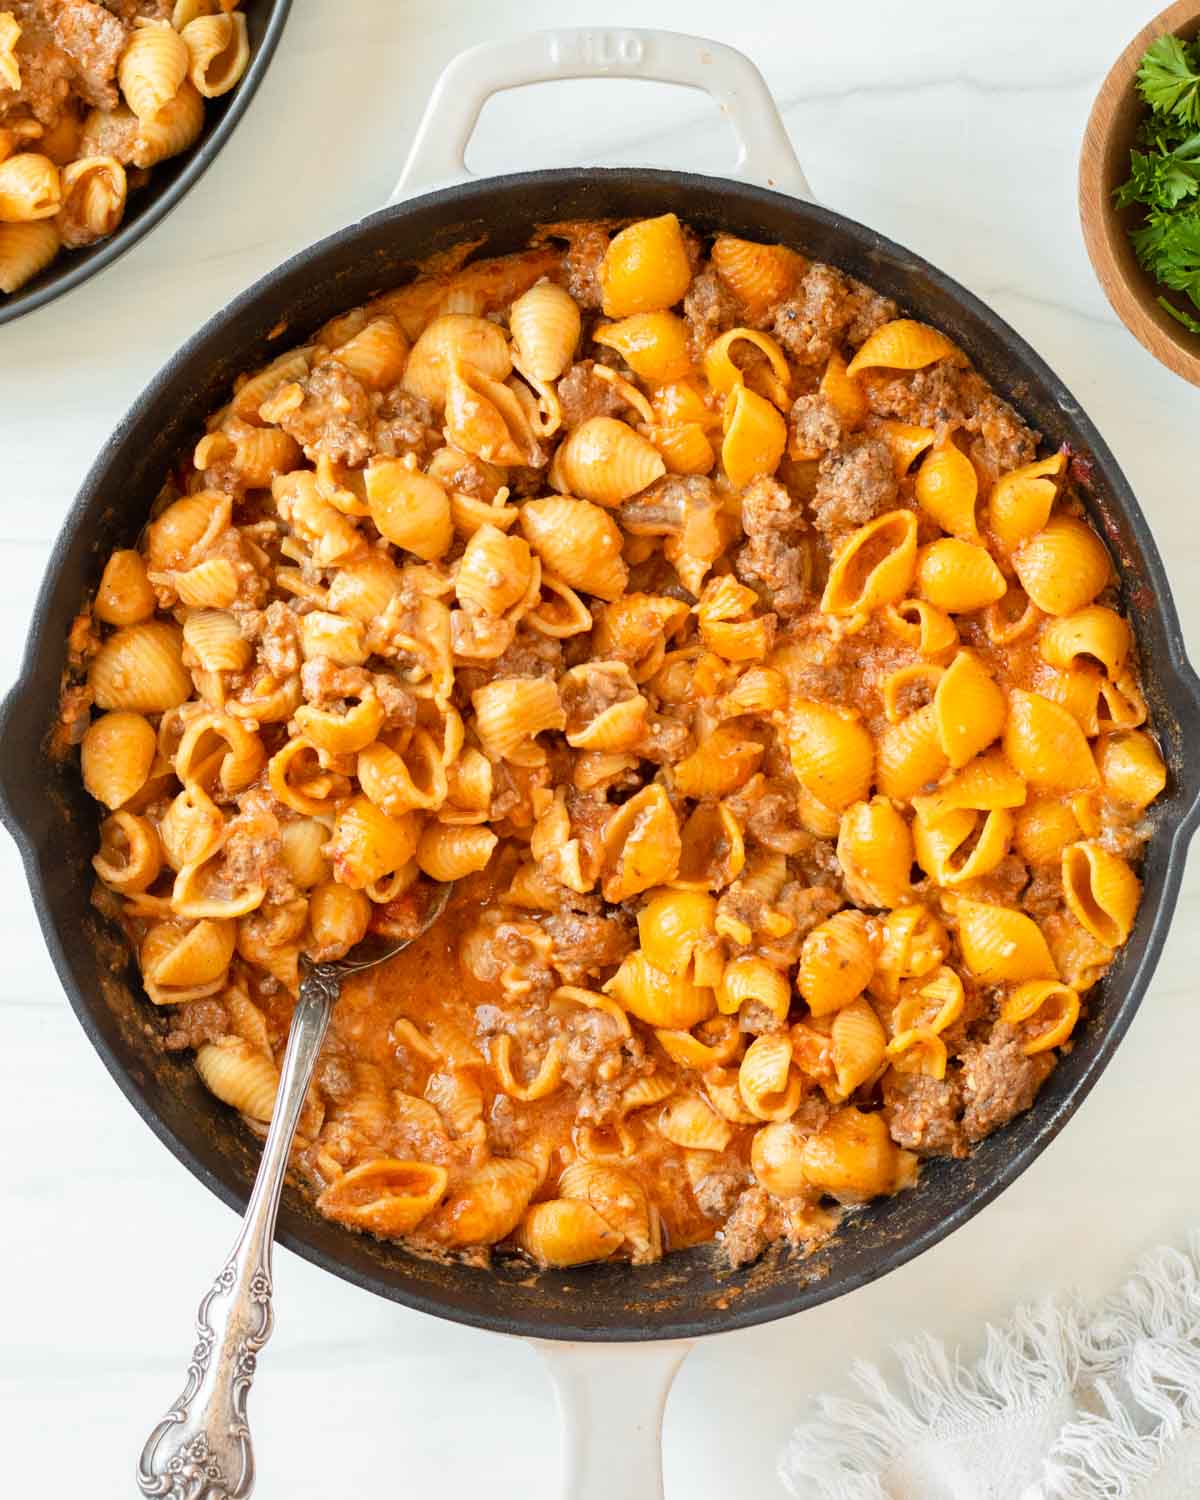 This recipe for cheeseburger pasta is an easy, one-pan dinner perfect for a weeknight meal or kid-friendly dinner.